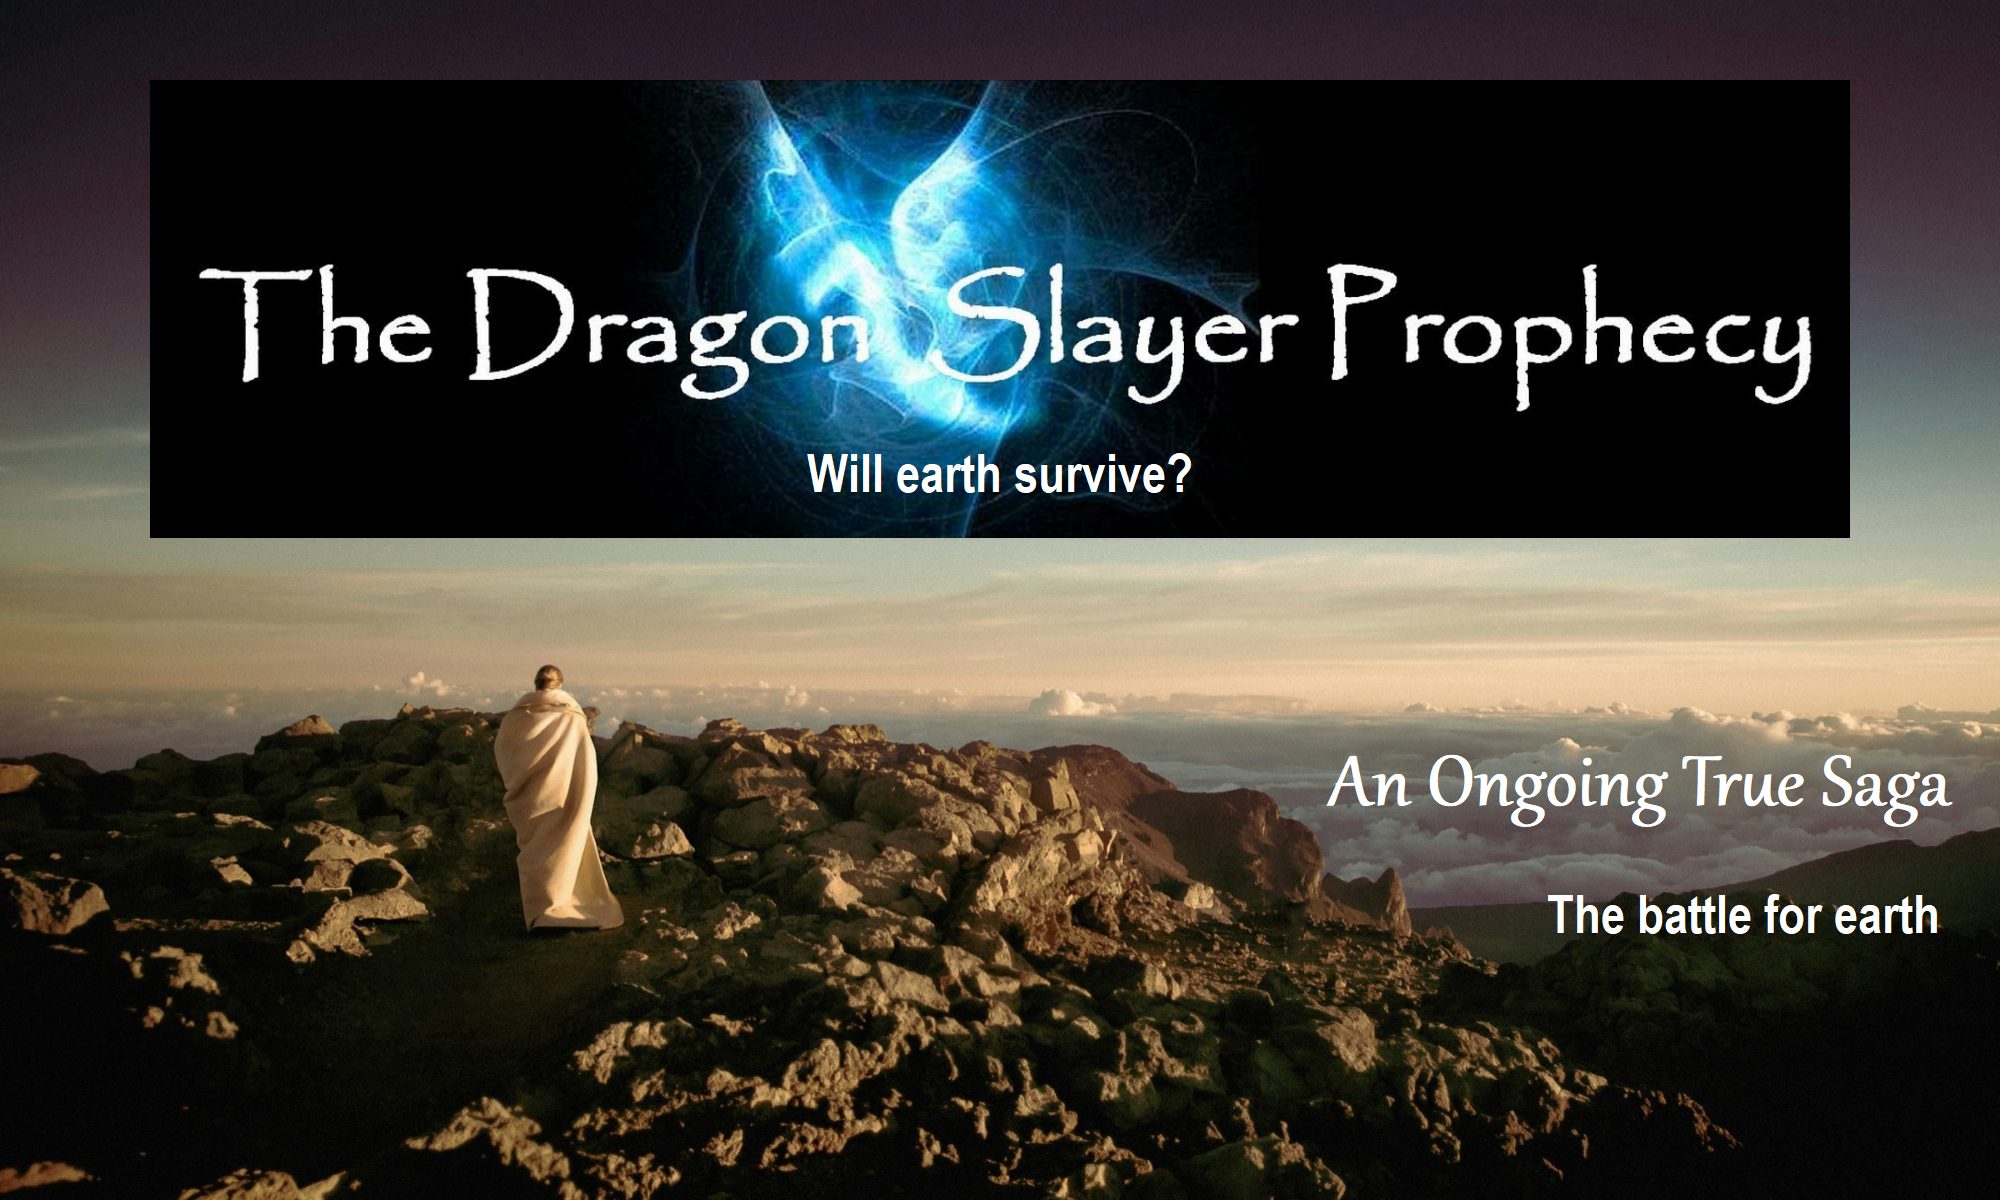 The Dragon Slayer Prophecy has been fulfilled William Eastwood new film